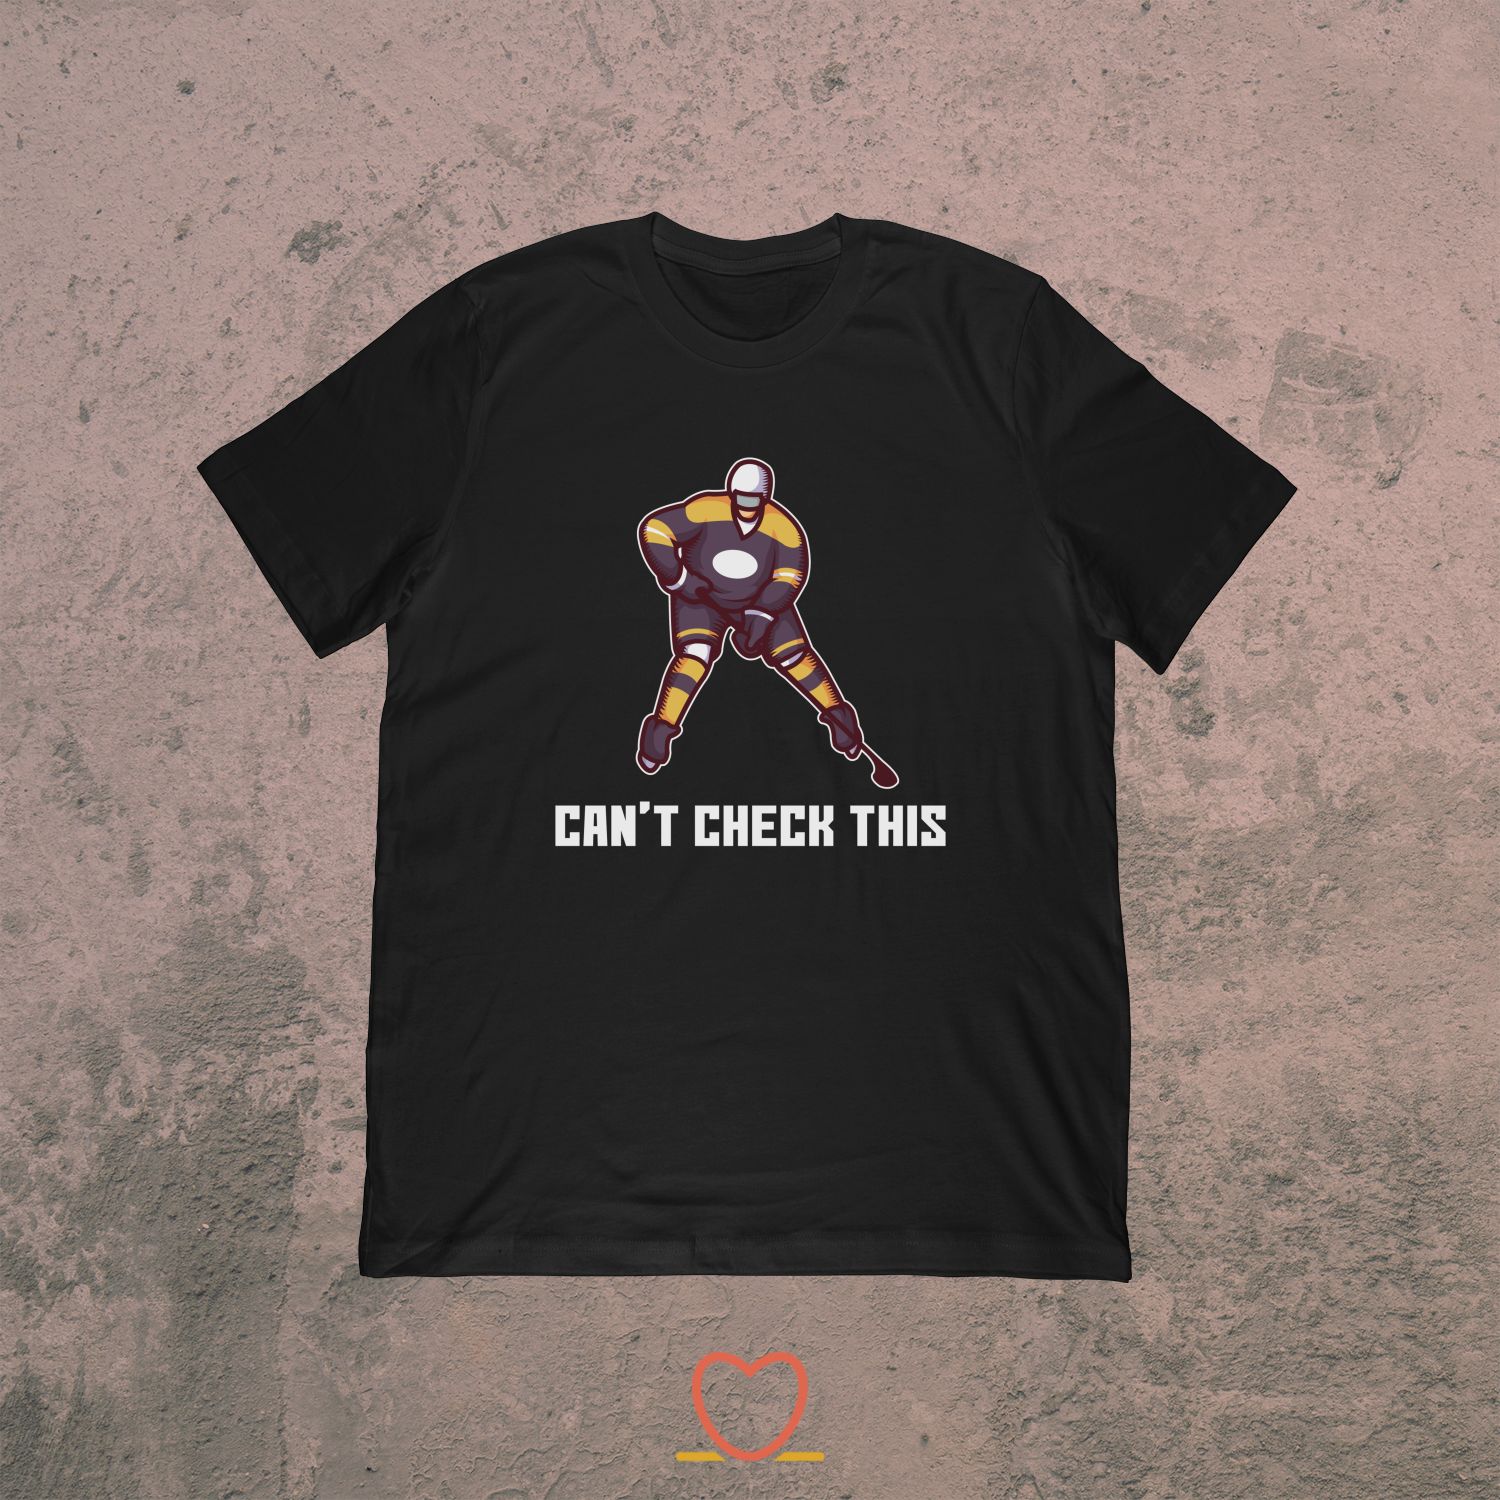 Can’t Check This – Funny Ice Hockey Tee